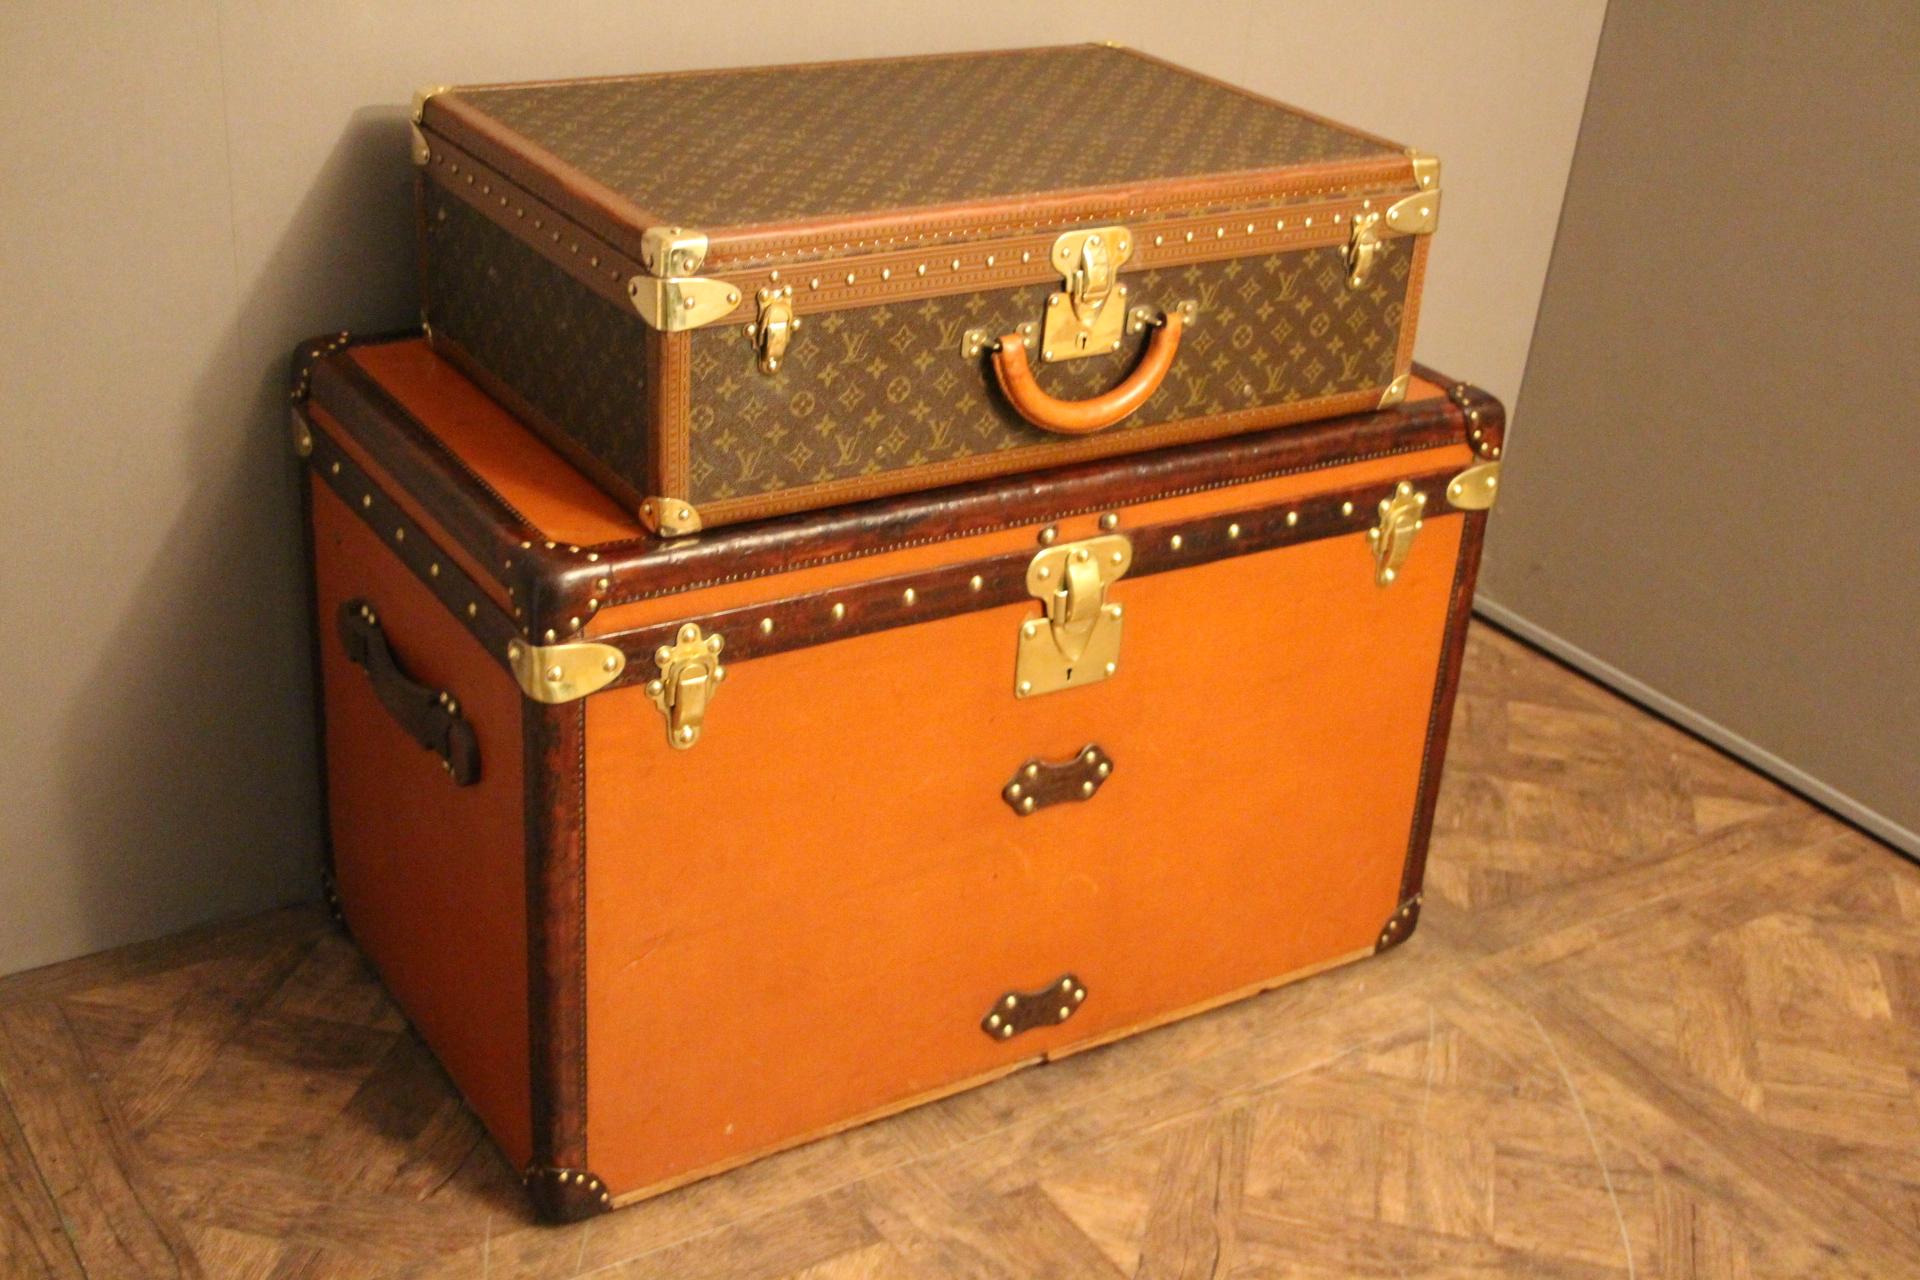 Magnificent Louis Vuitton Alzermonogramm suitcase.
All Louis Vuitton stamped solid brass fittings: locks, clasps and studs.
Superb interior, all original with its removable tray, its Louis Vuitton label and its serial number.

 